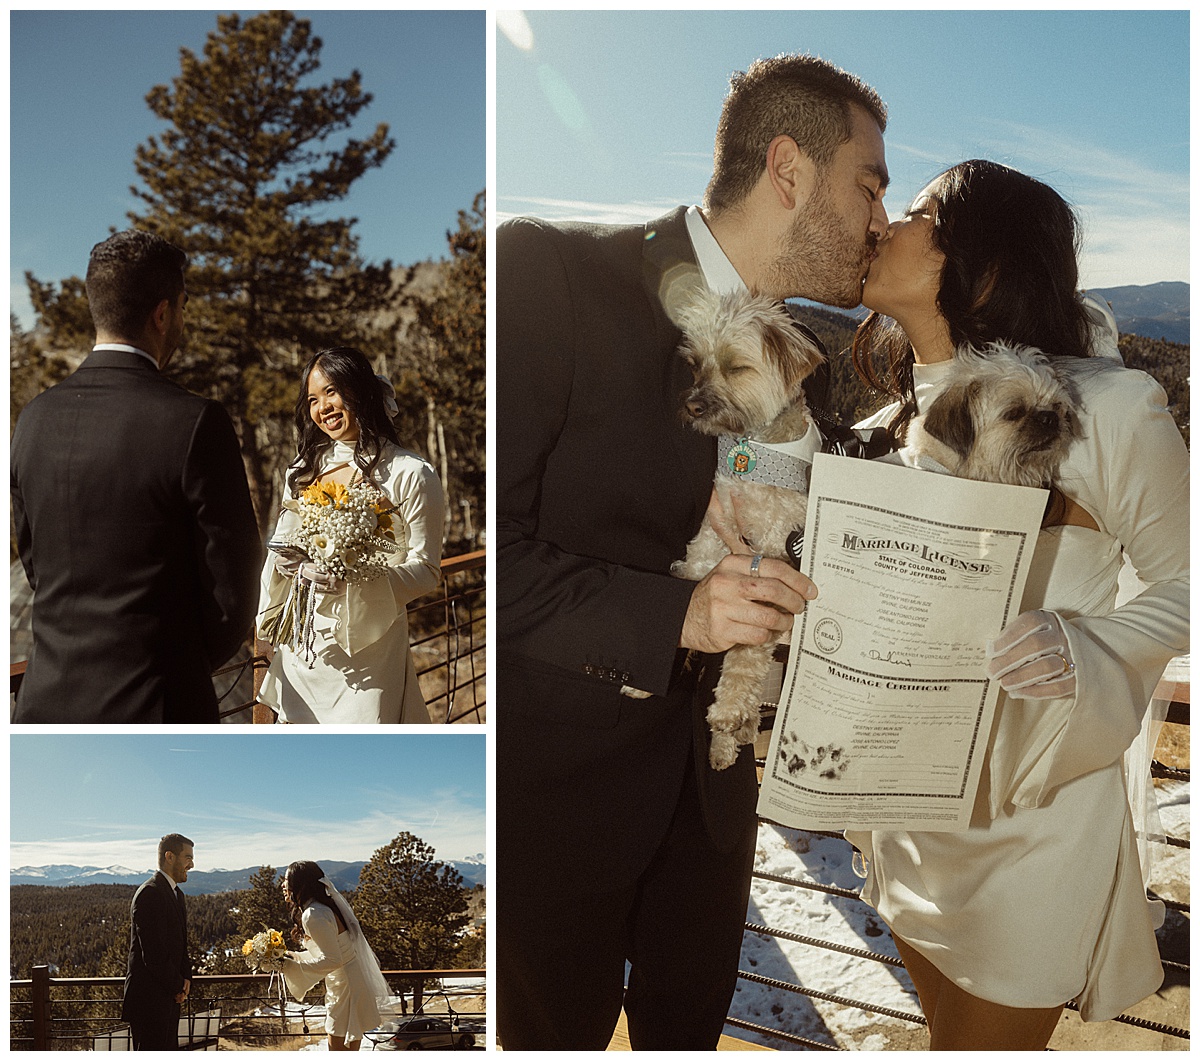 Planning a Colorado elopement was easy for this couple, who eloped on a patio in the mountains.